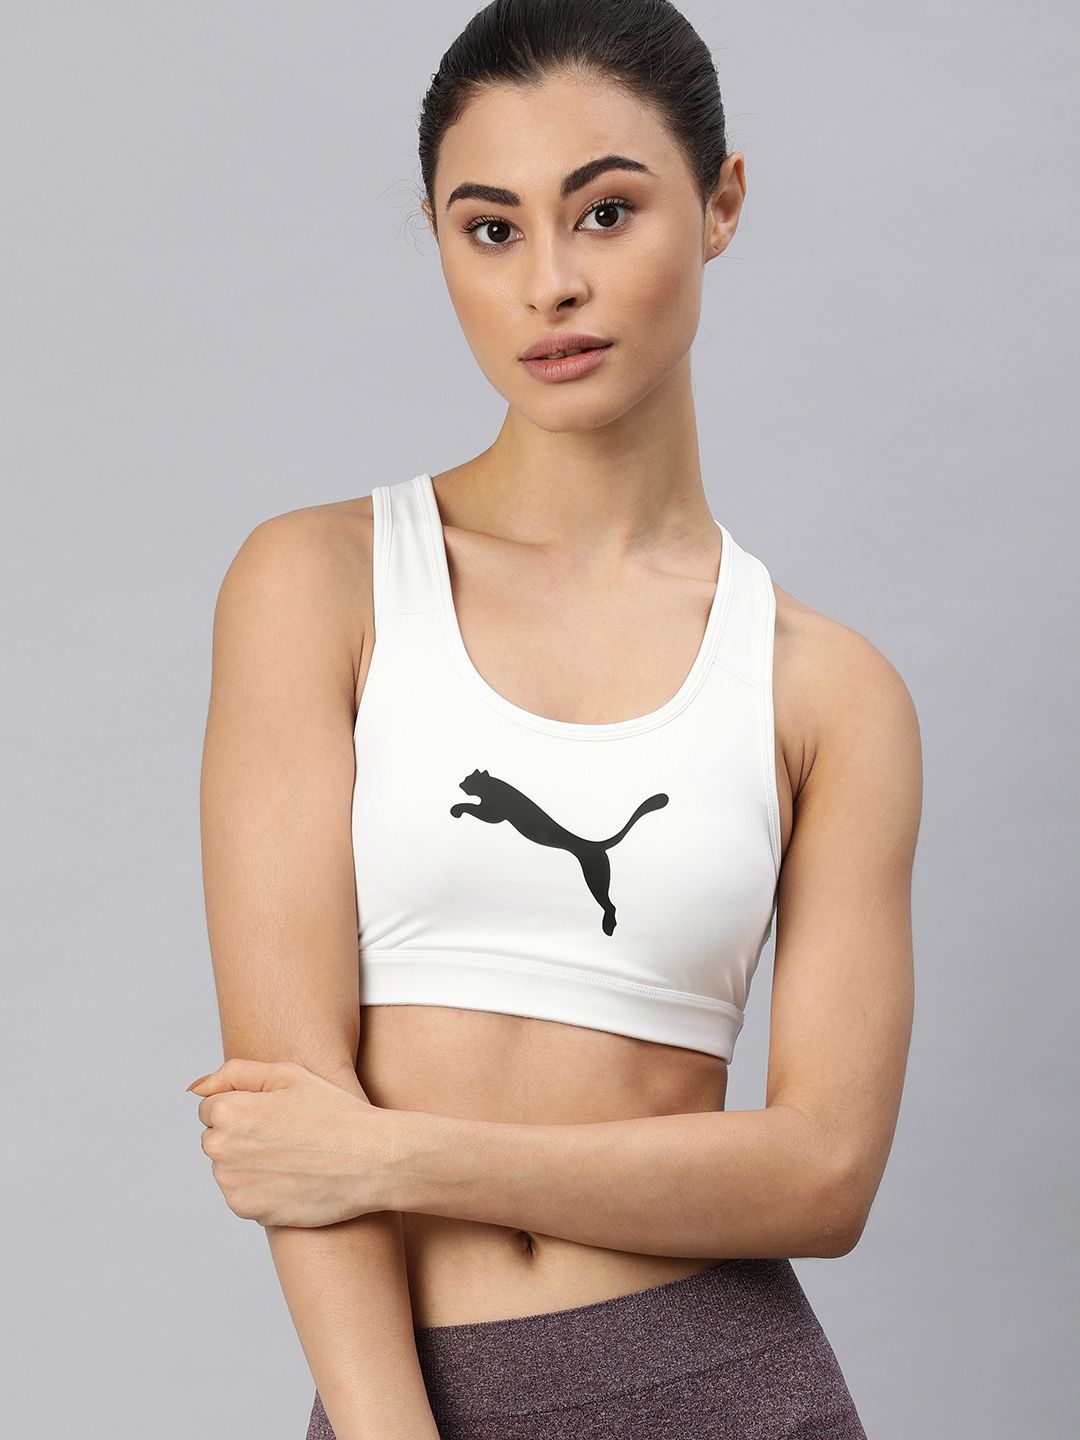 Puma White & Black Printed Non-Wired Lightly Padded Sports Bra Price in India